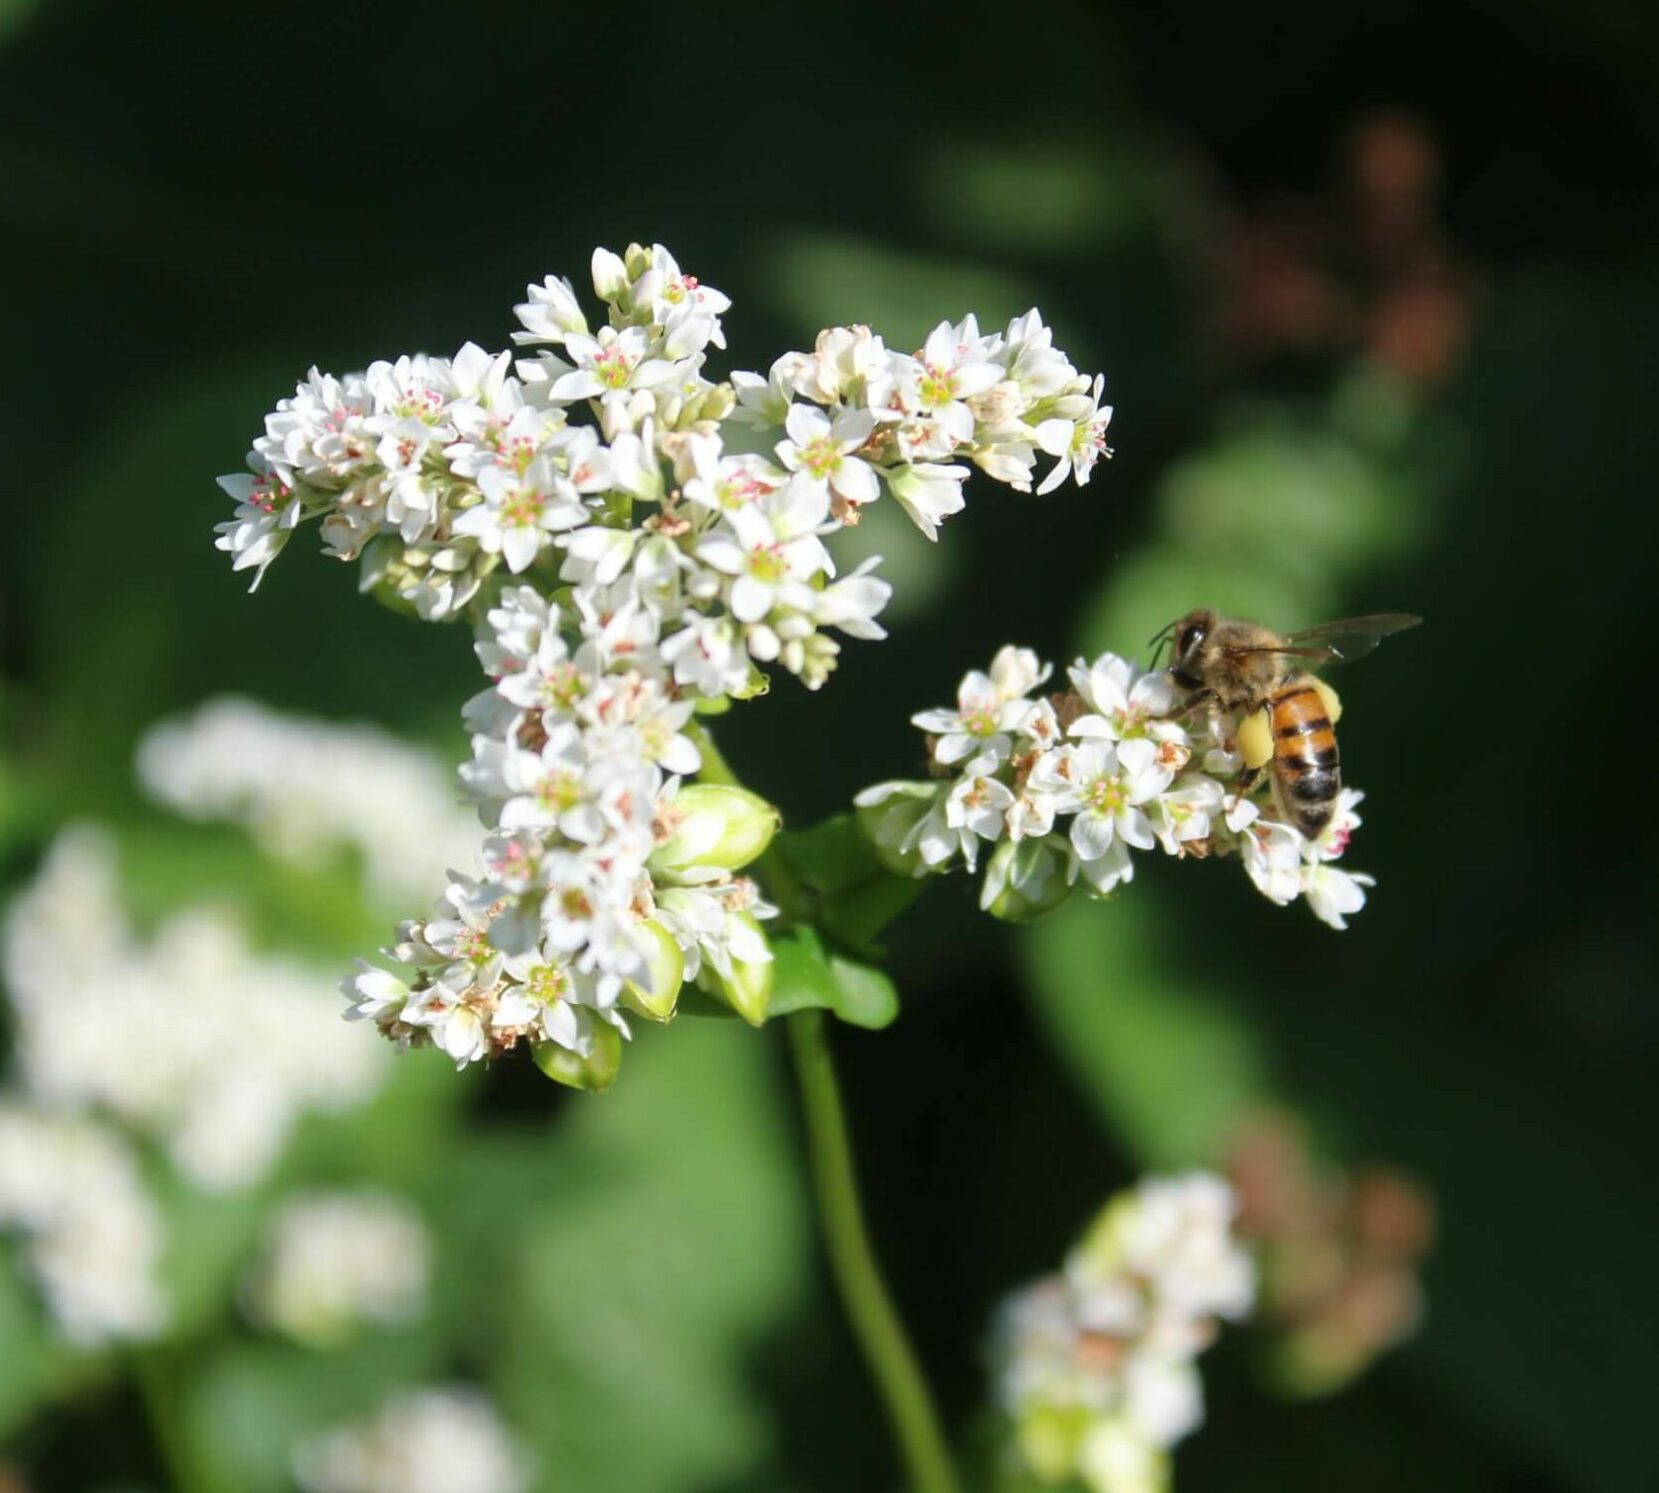 White Buckwheat flowers with a bee buzzing around them